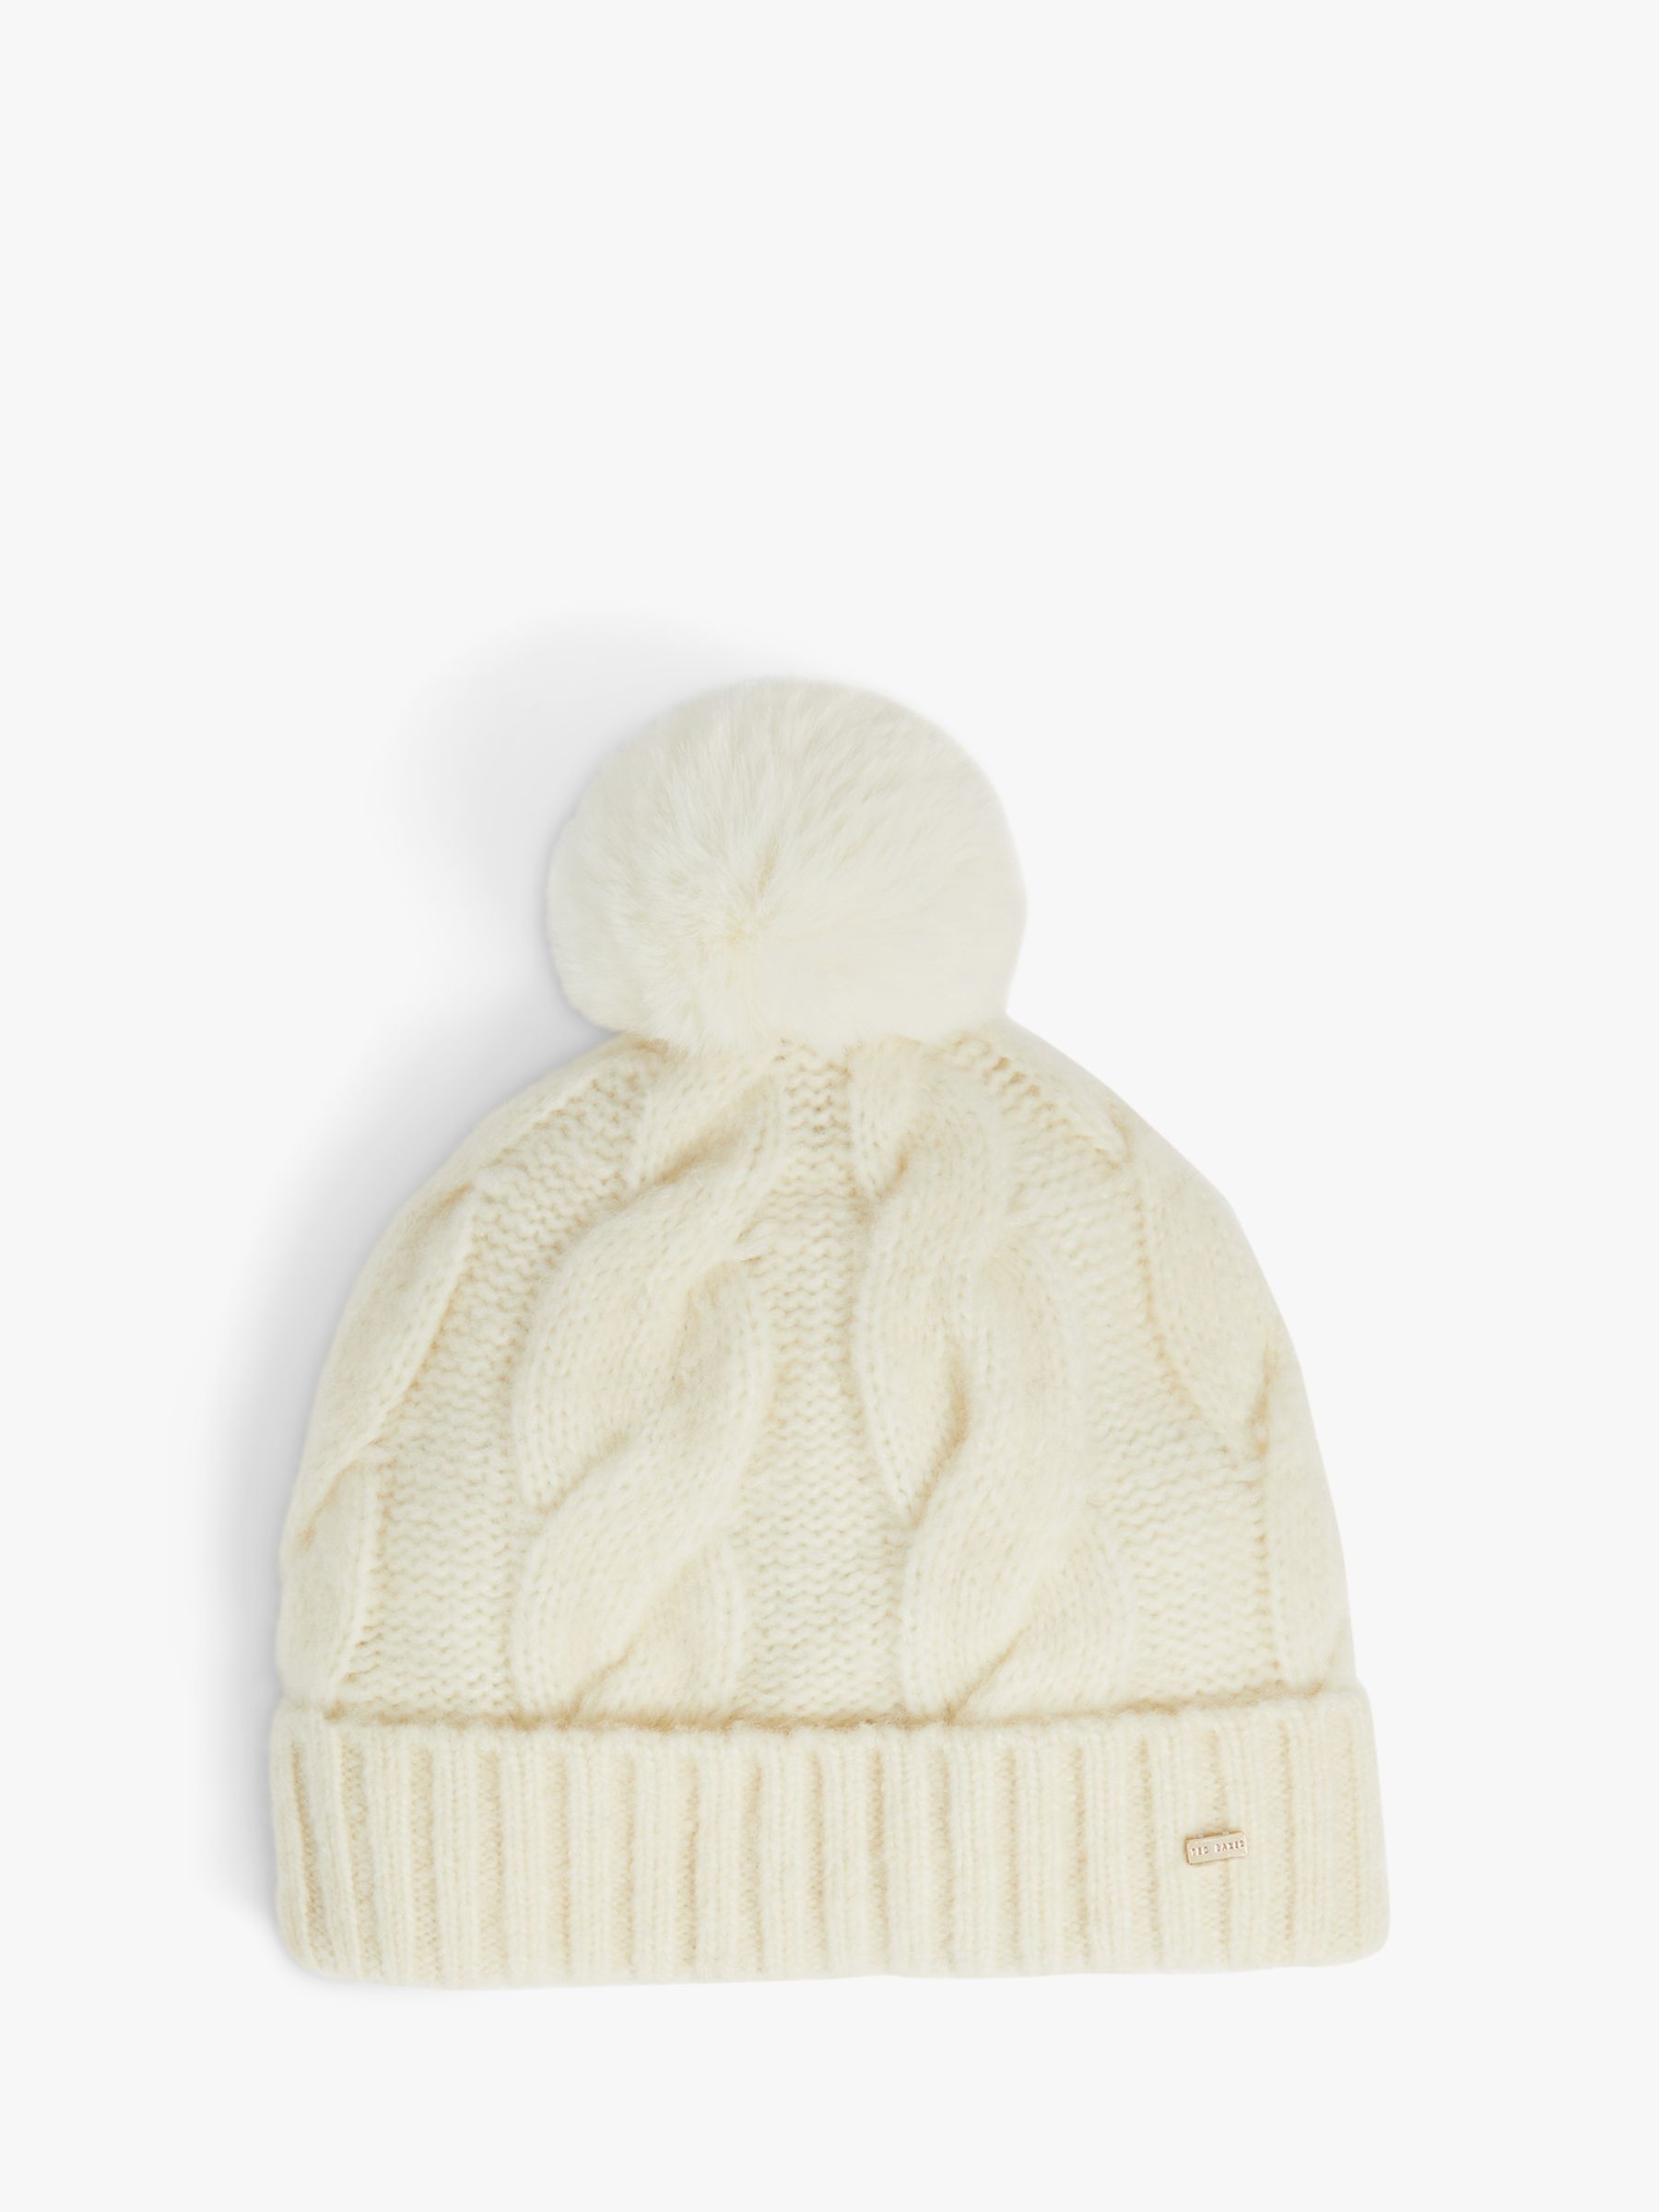 Ted Baker Hanns Cable Knit Wool Blend Beanie, Cream